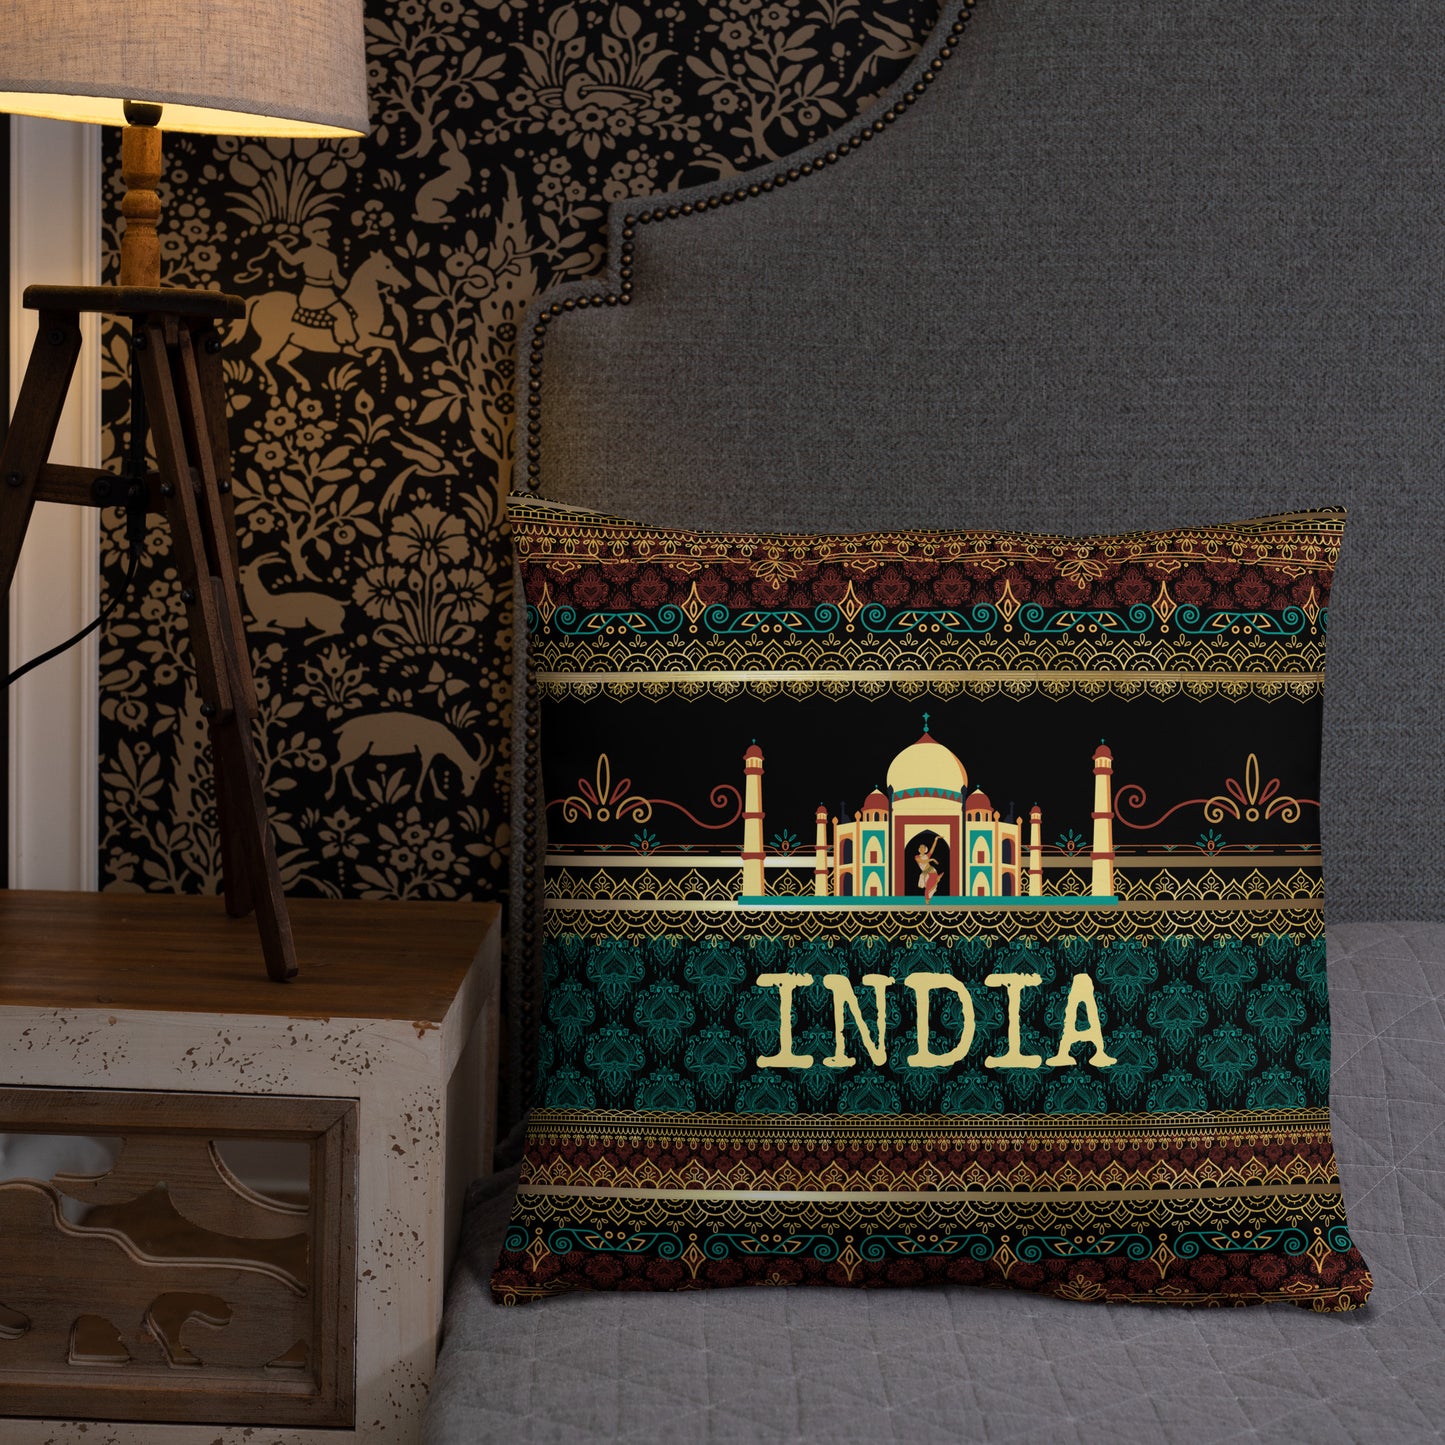 India Travel Gift | India Vacation Gift | India Travel Souvenir | India Vacation Memento | India Home Décor | Keepsake Souvenir Gift | Travel Vacation Gift | World Travel Gift Pillow